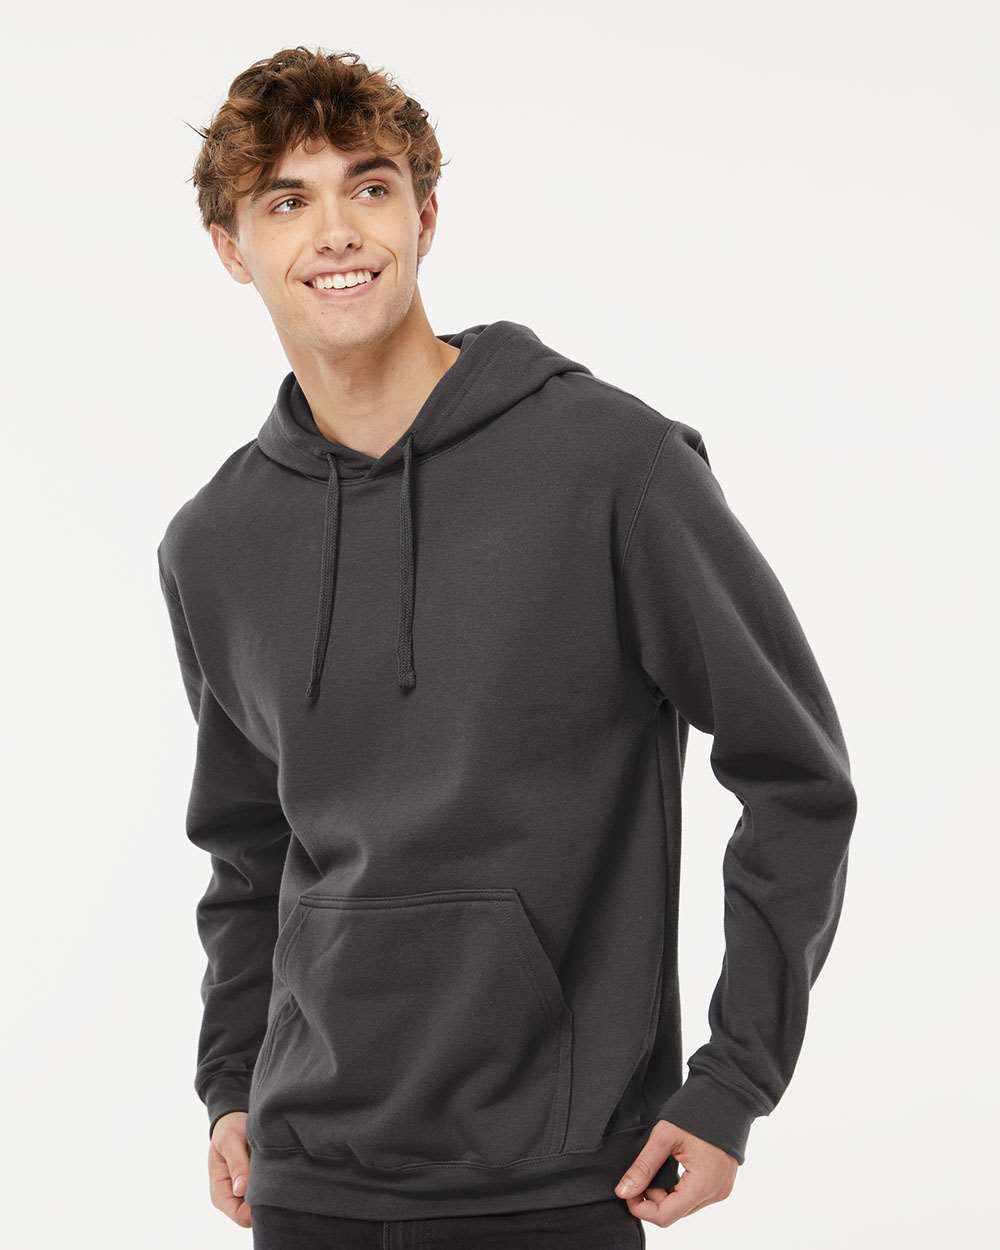 M&O Unisex Pullover Hoodie 3320 #colormdl_Charcoal